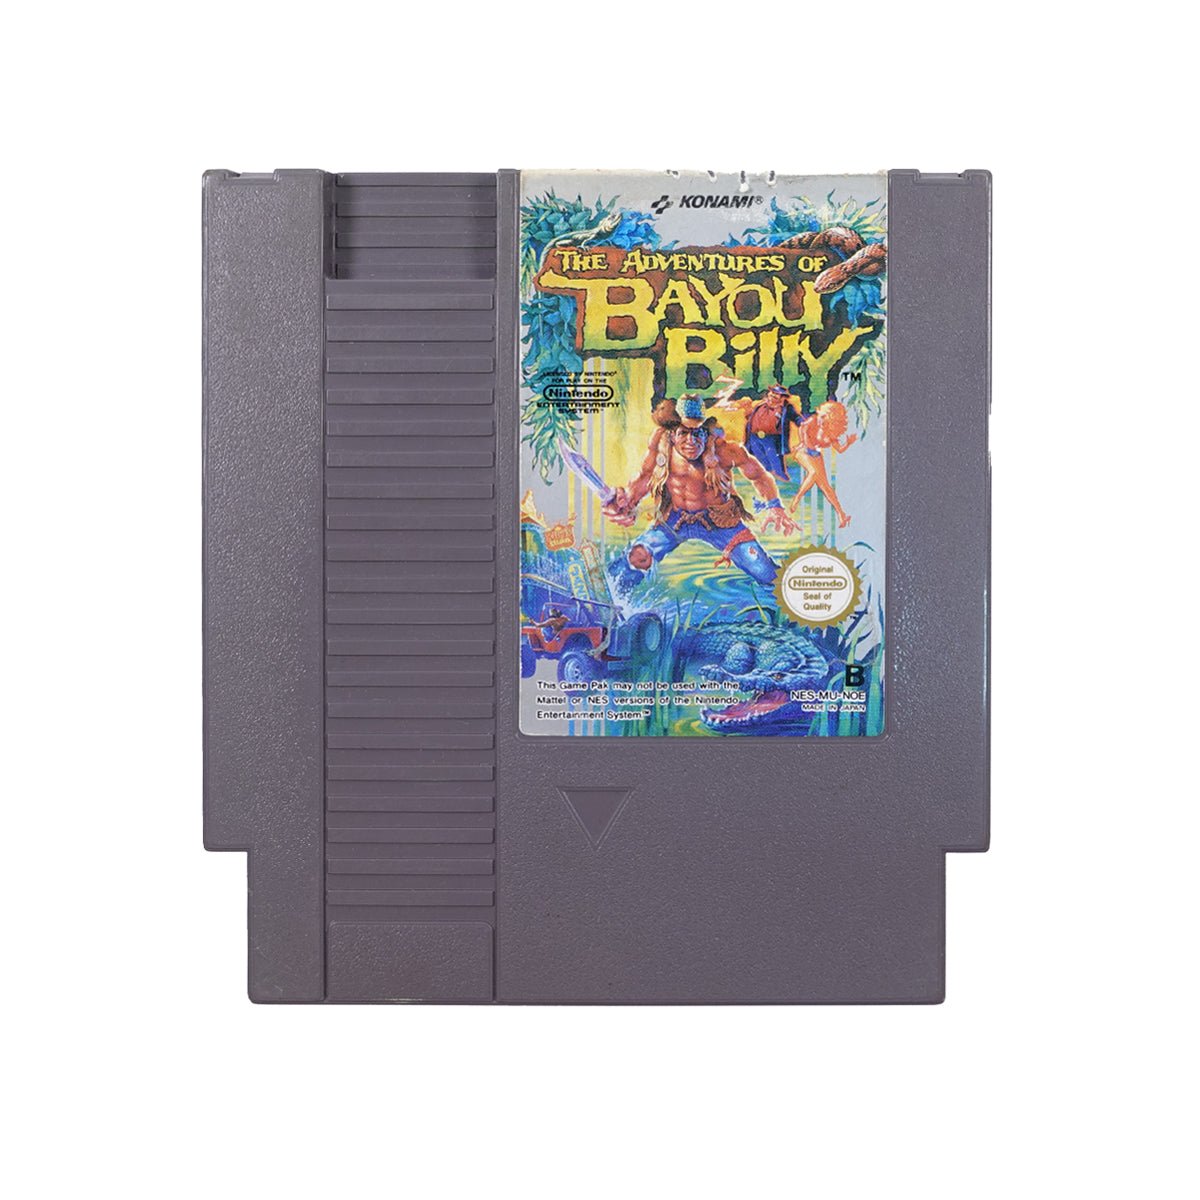 (Pre-Owned) The Adventures of Bayou Billy - Nintendo NES - Store 974 | ستور ٩٧٤